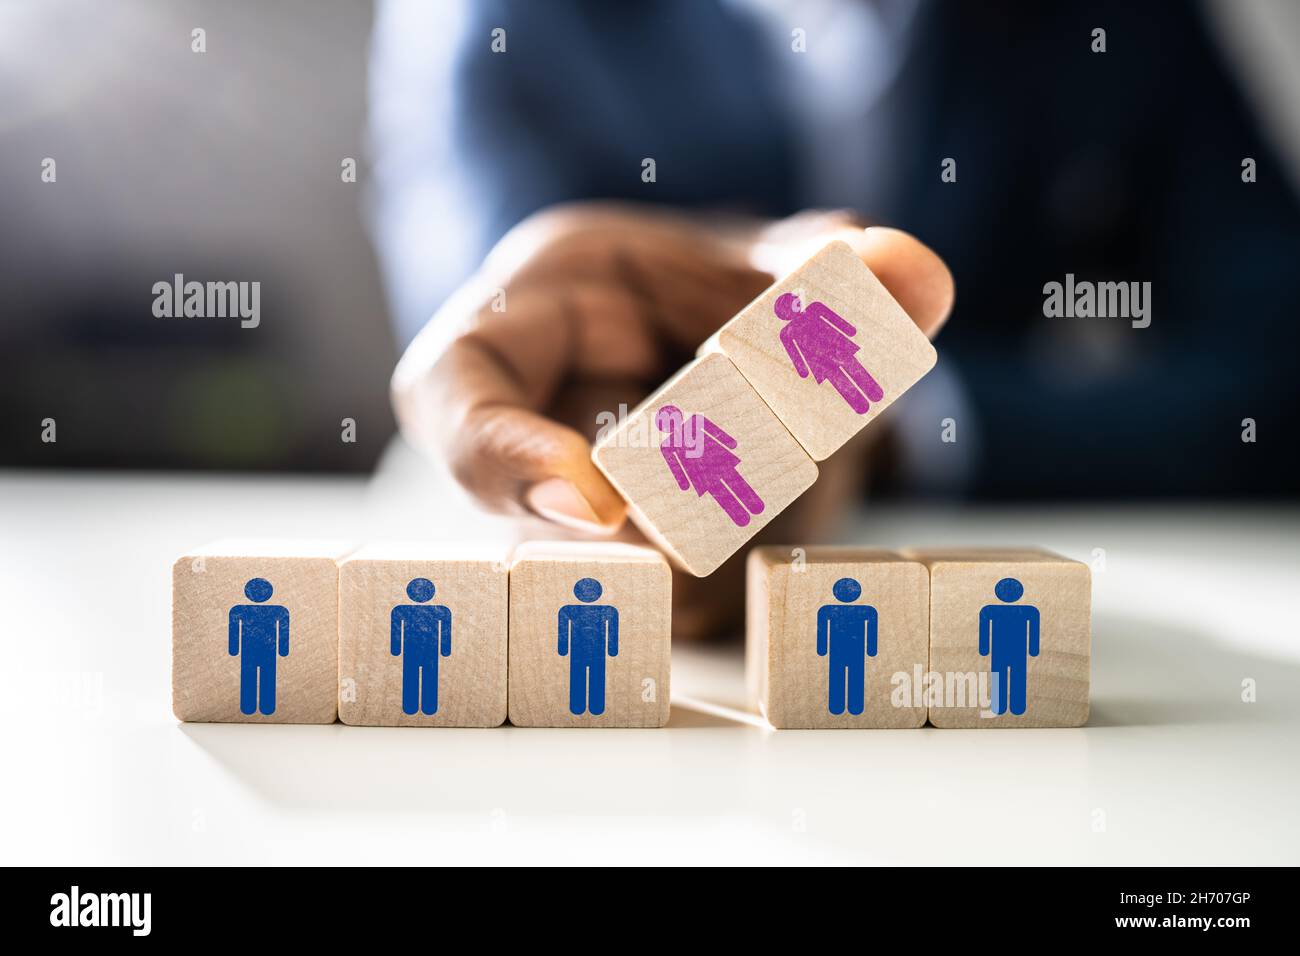 Equal Employee And Gender Opportunity Concept In Career Stock Photo